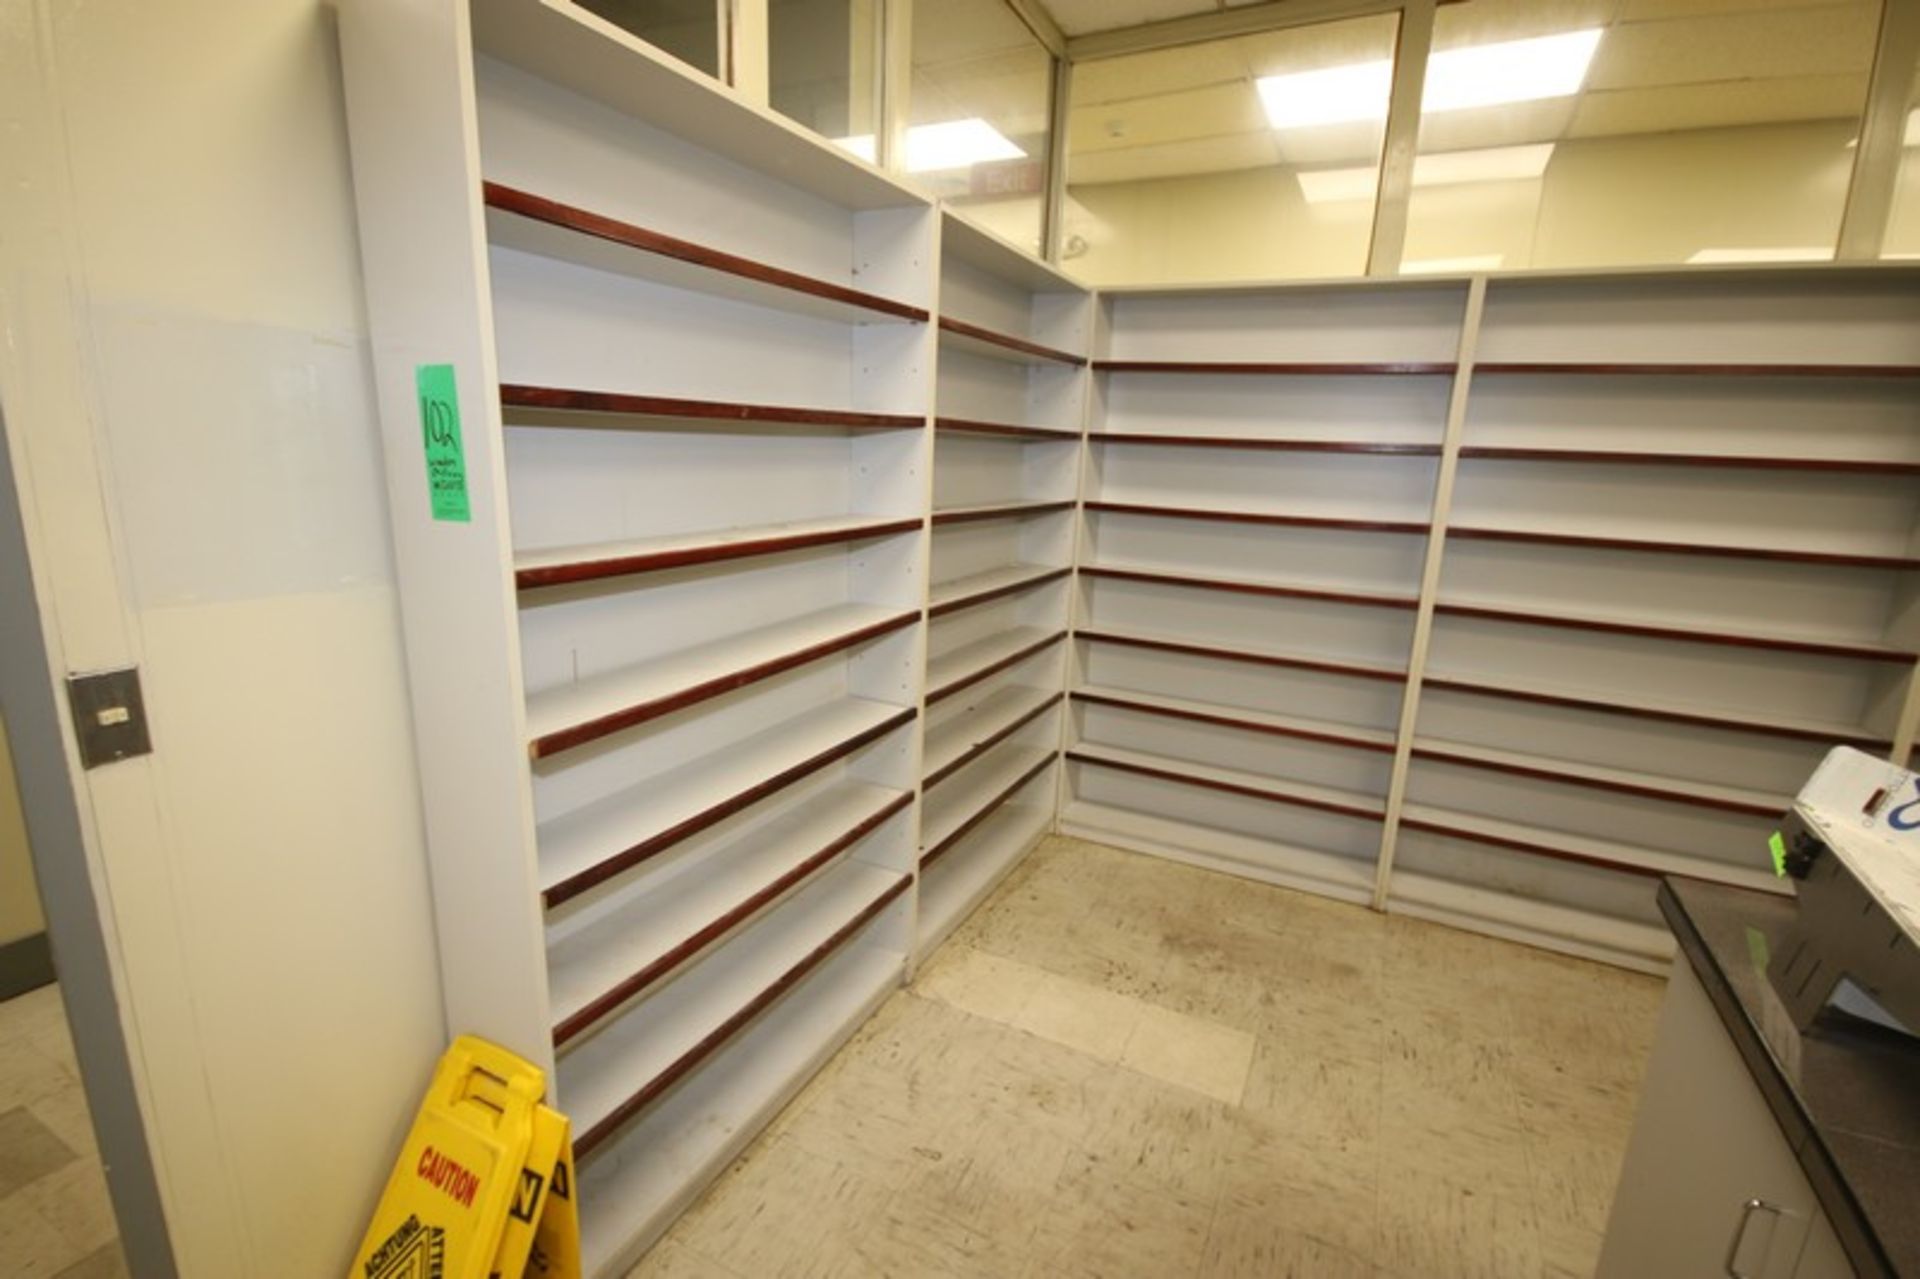 Sections of Wooden Lab Shelving, Section Overall Dims.: Aprox. 7' H x 4' W (Old Tag #102) (Located